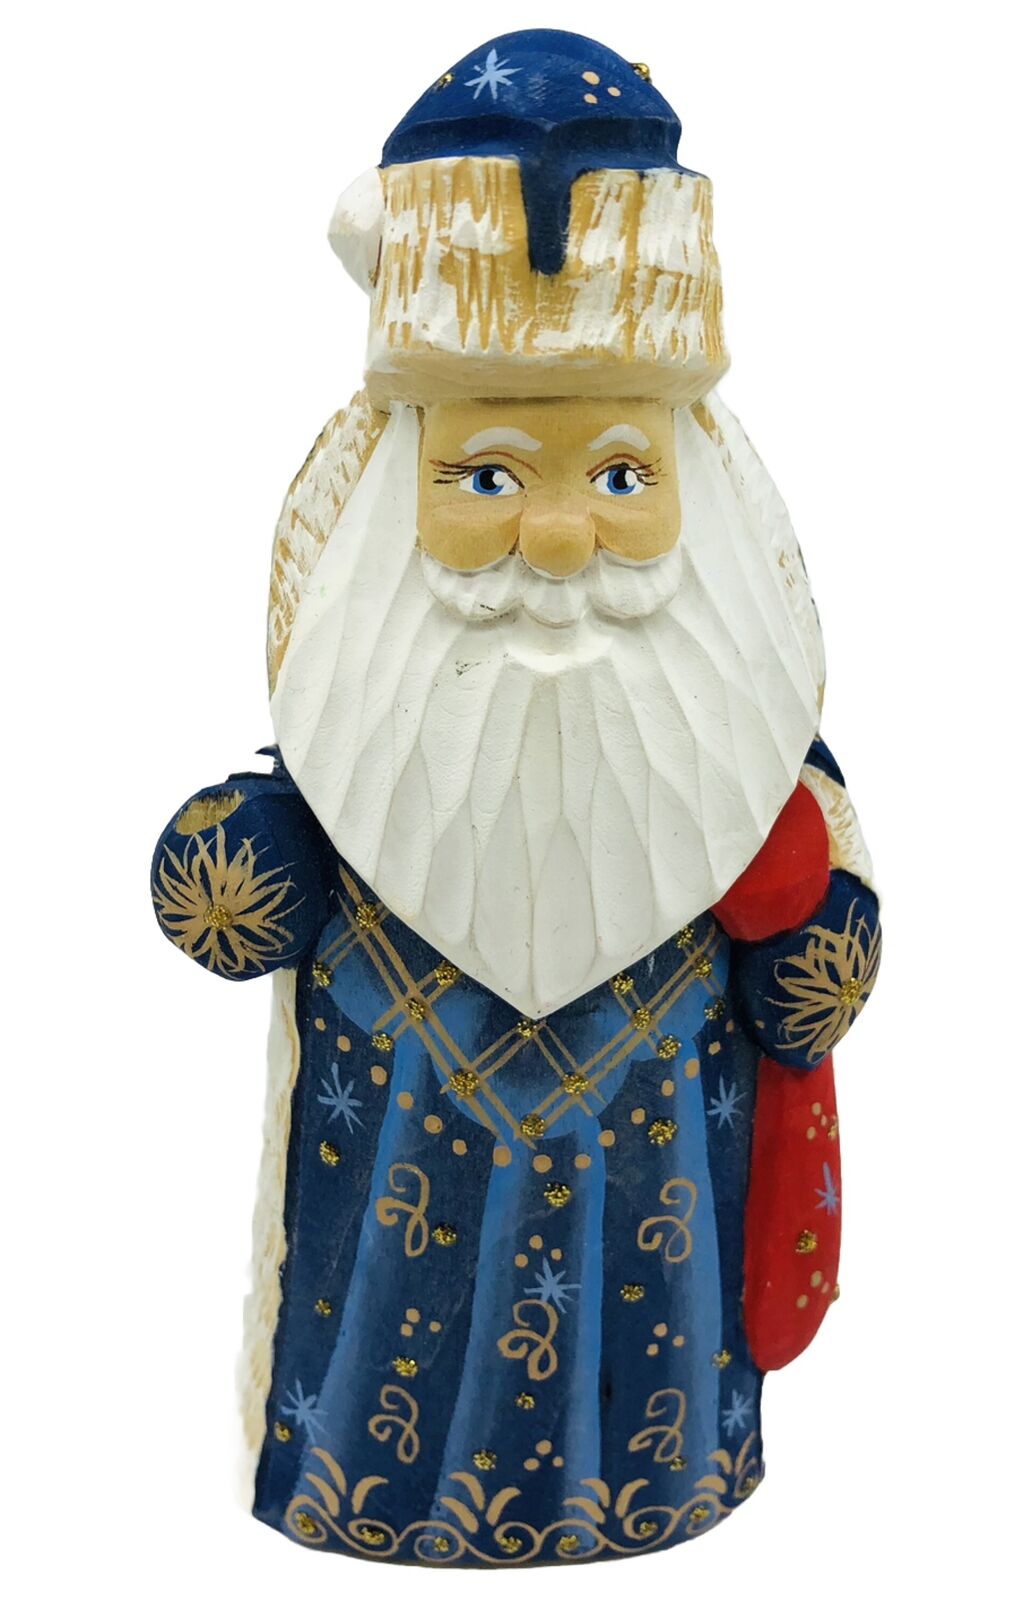 Vintage Russian Hand Painted Carved Wood Santa Claus Statue Figurine 5.25”